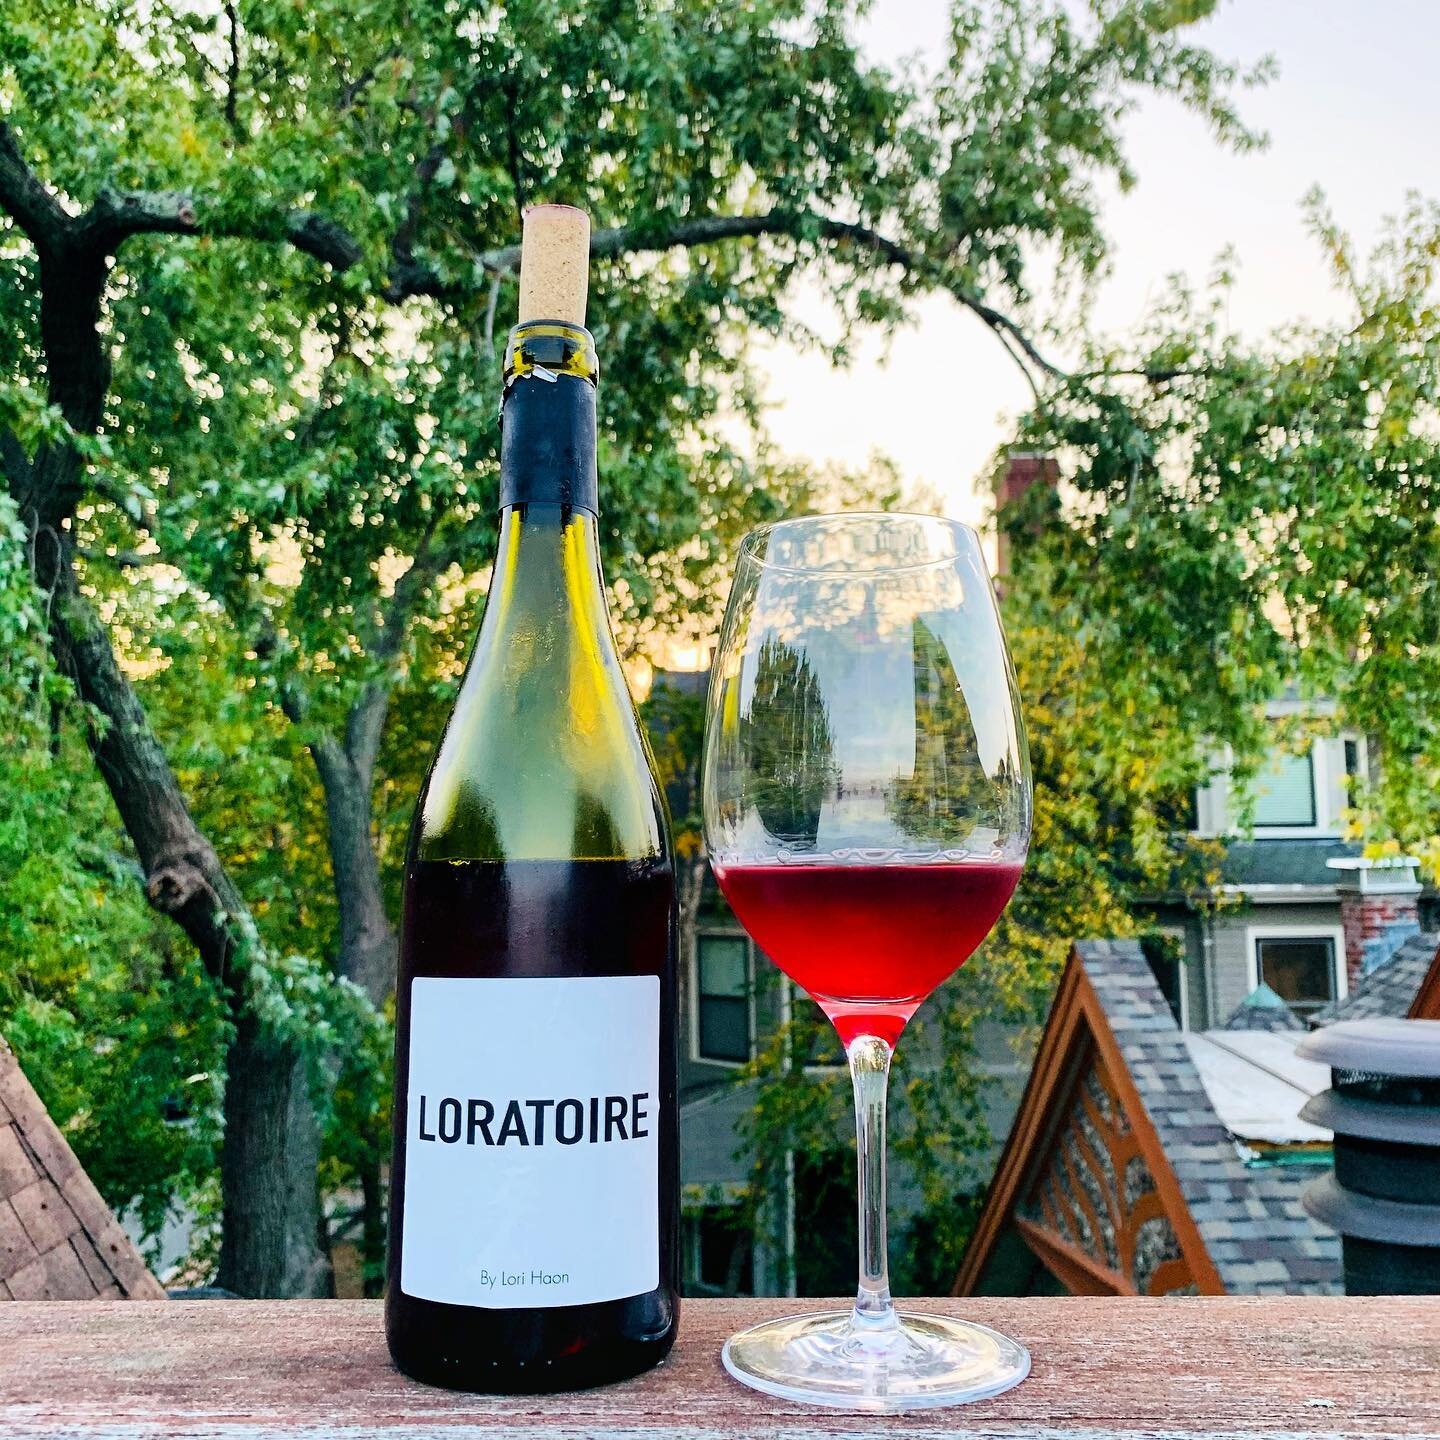 LORATOIRE from @petitoratoire just arrived - a blend of Carignan + Grenache that&rsquo;s between a rosé and red. Juicy raspberries, cherries, and cranberries with crisp acidity. Fall in a bottle.